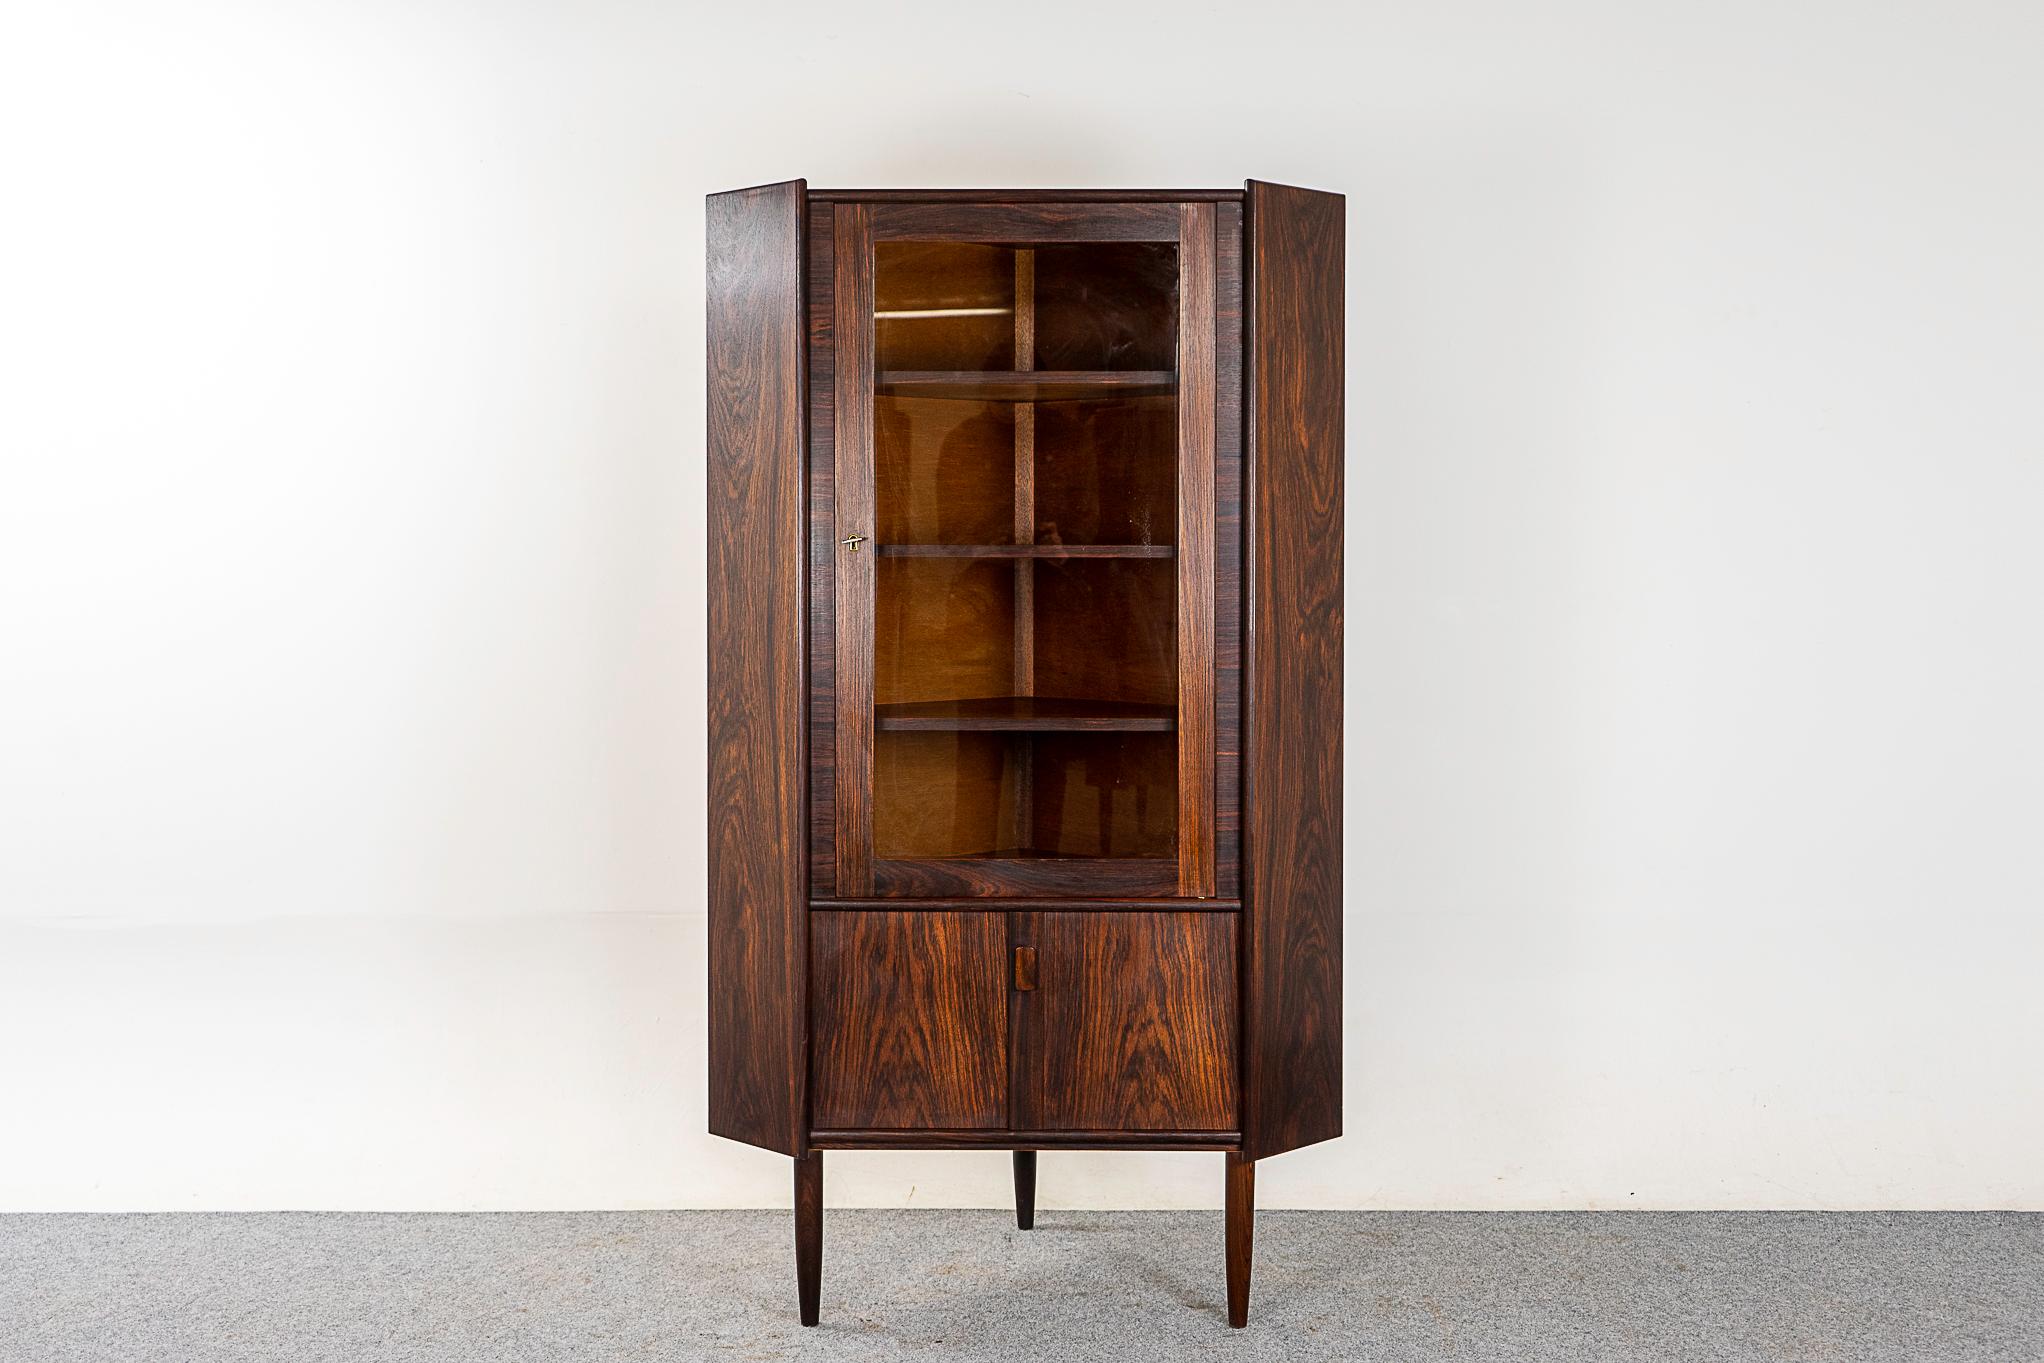 Rosewood & glass Danish corner cabinet, circa 1960s. Beautiful graining, new pristine glass and locking upper compartment. Make the most of that empty corner!

Please inquire for international shipping rates.